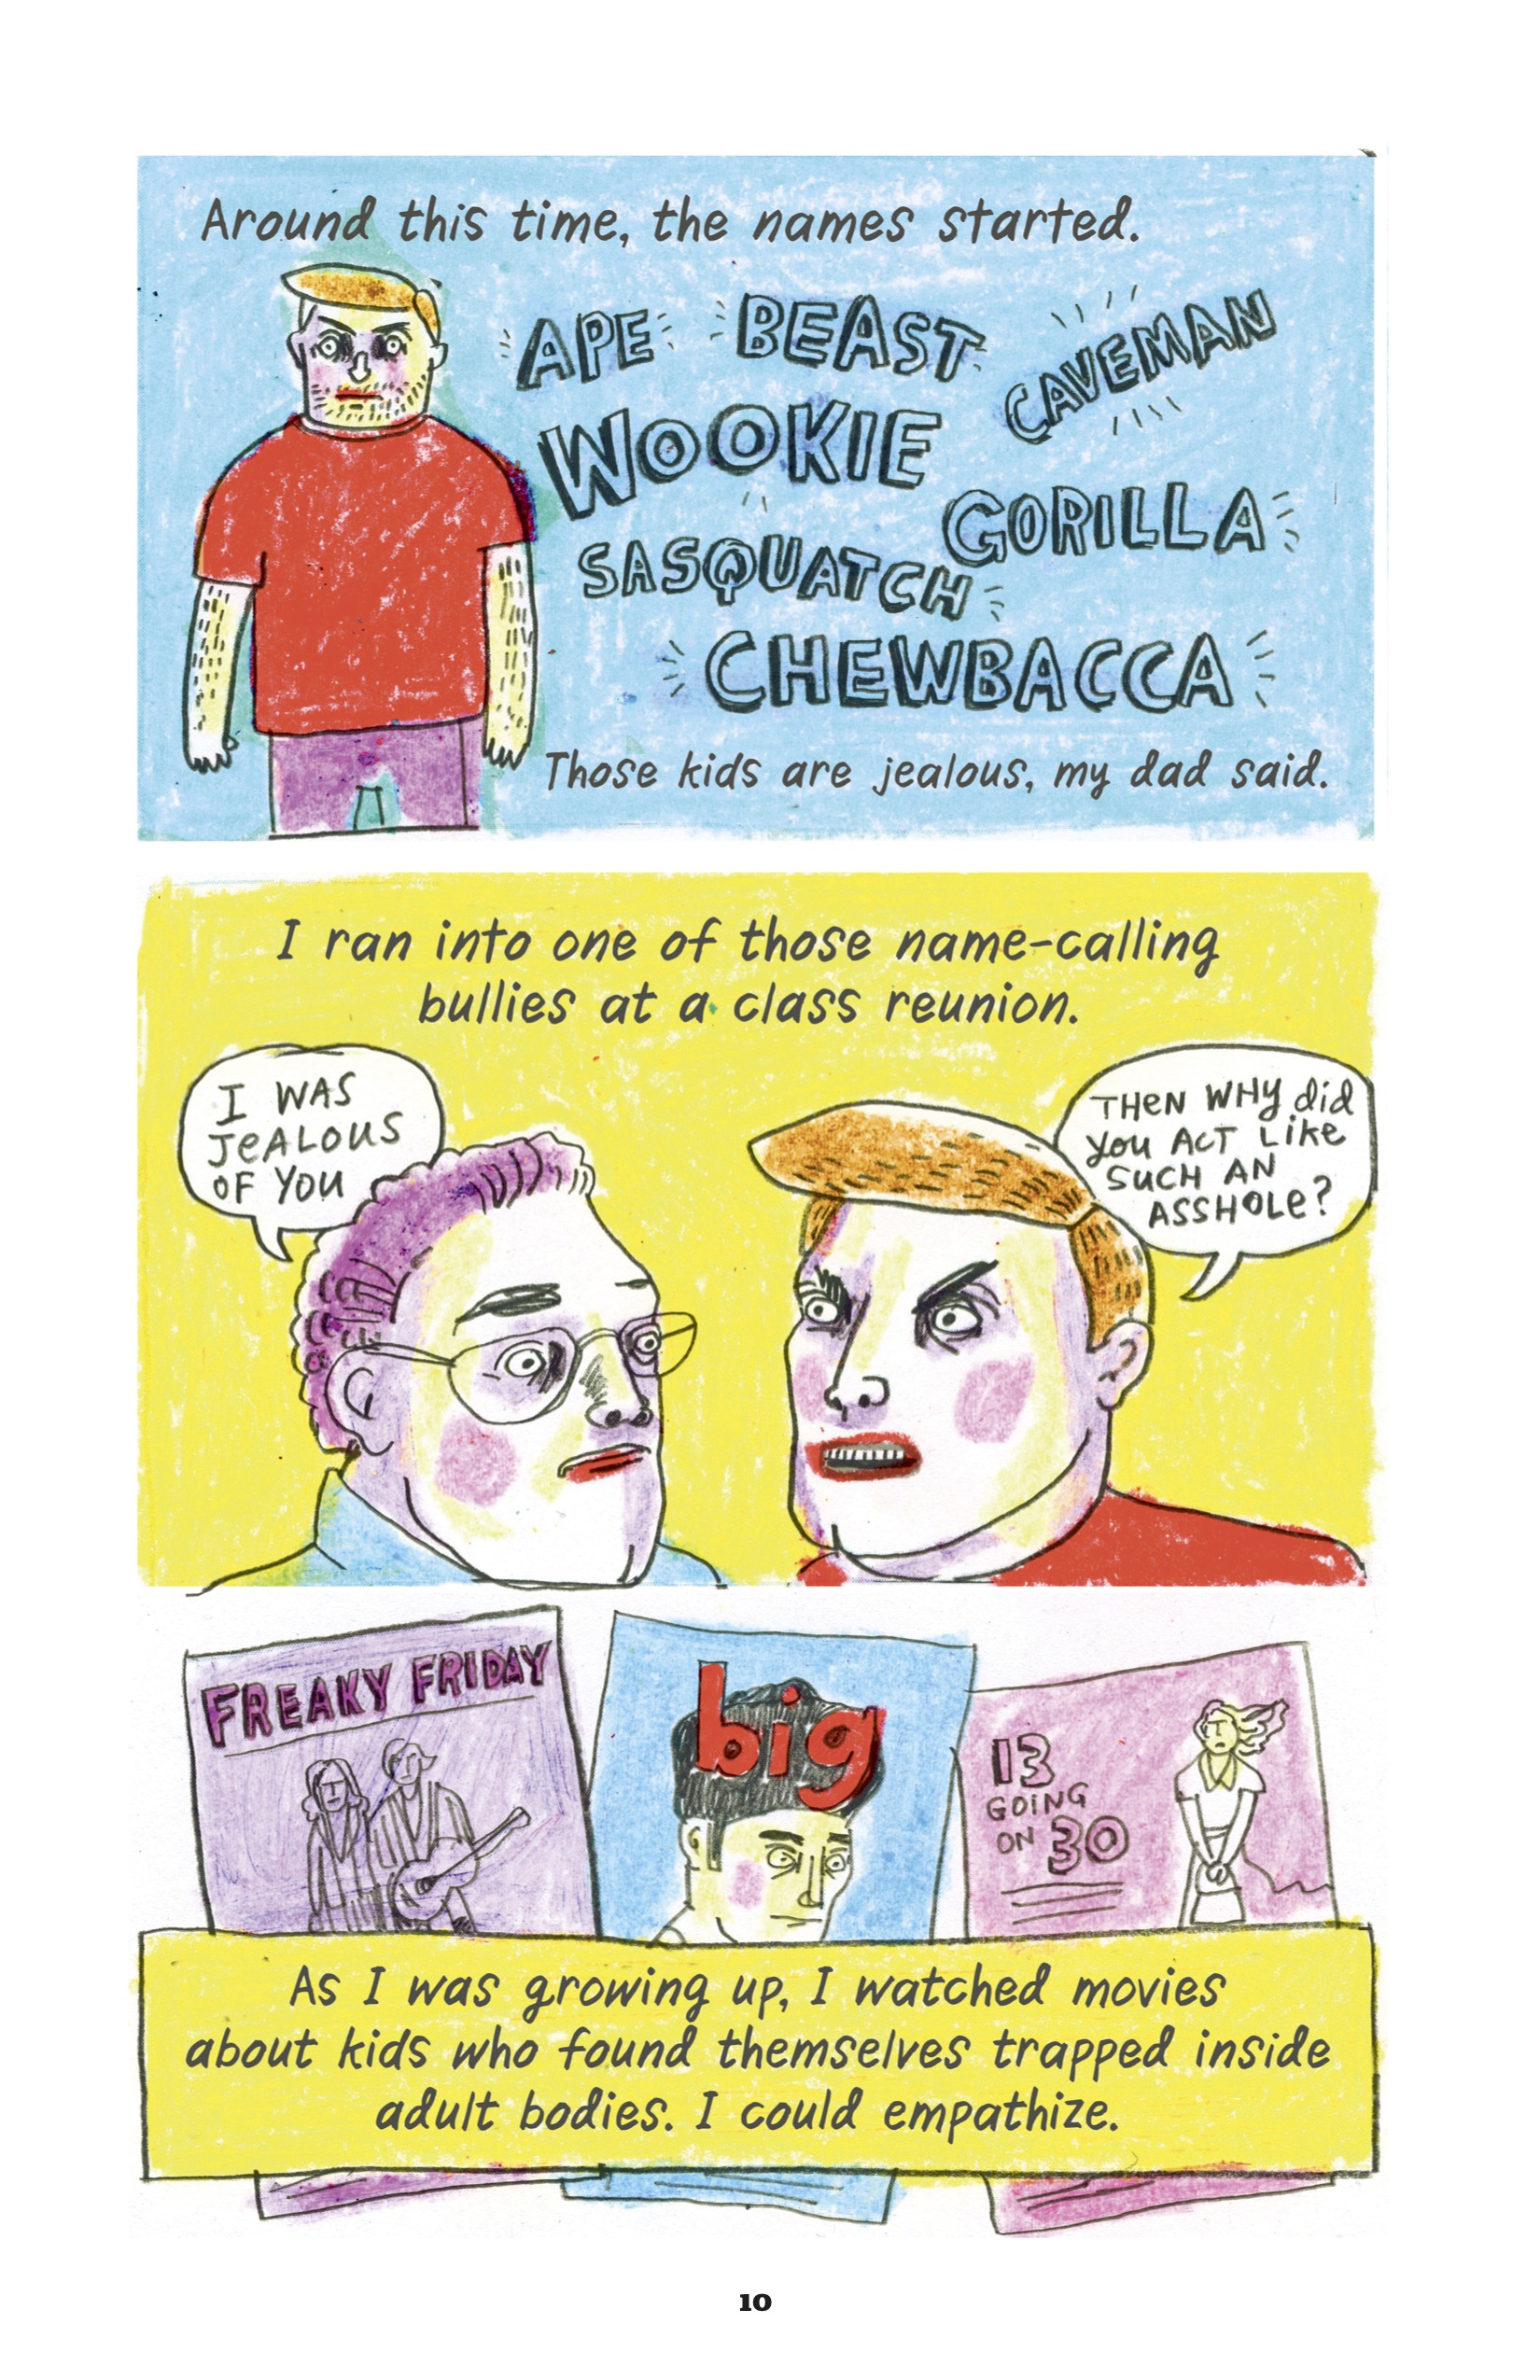 Another 3 panel page. 
1. Emil writes, â€œAround this time, the names started.â€ In all-caps block letters: â€œAPE, BEAST, CAVEMAN, WOOKIE, GORILLA, SASQUATCH, CHEWBACCA.â€ Back to standard lettering, â€œThose kids are jealous, my dad said.â€ The background is blue. Emil stands to the left of the names, looking tall and broad shouldered, arms straight at his sides, frowning and scowling slightly.
2. Emil continues, â€œI ran into one of those name-calling bullies at a class reunion.â€ A man with cropped, pink curly hairâ€”perhaps the adult version of the kid from the first pageâ€”looks at adult Emil with a straight face and says, â€œI was jealous of you.â€ Adult Emil, who now has a more squared jaw and chin, responds, â€œThen why did you act like such an asshole?â€ He is scowling. The background is bright yellow.
3. In a yellow block of text, the narration says, â€œAs I was growing up, I watched movies about kids who found themselves trapped inside adult bodies. I could empathize.â€ The movie posters for Freaky Friday, Big, and 13 Going On 30 are spread out behind the text block. There is no color wash separating this panel from the white background of the page.